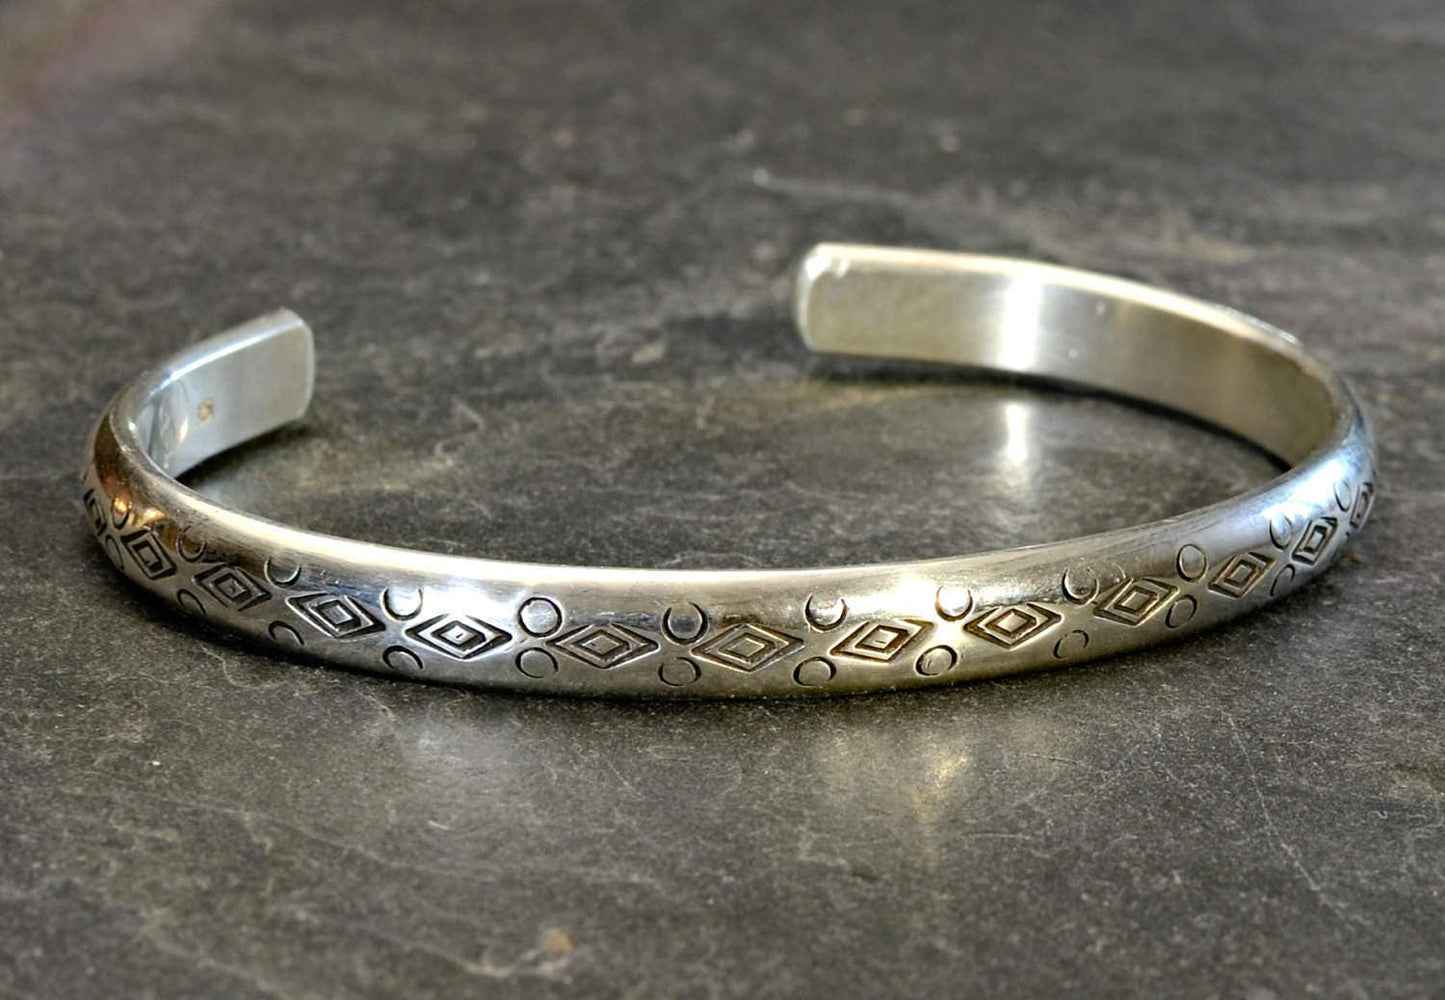 Half Round Cuff Bracelet in Sterling Silver imprinted using Handmade Native American Metal Stamps